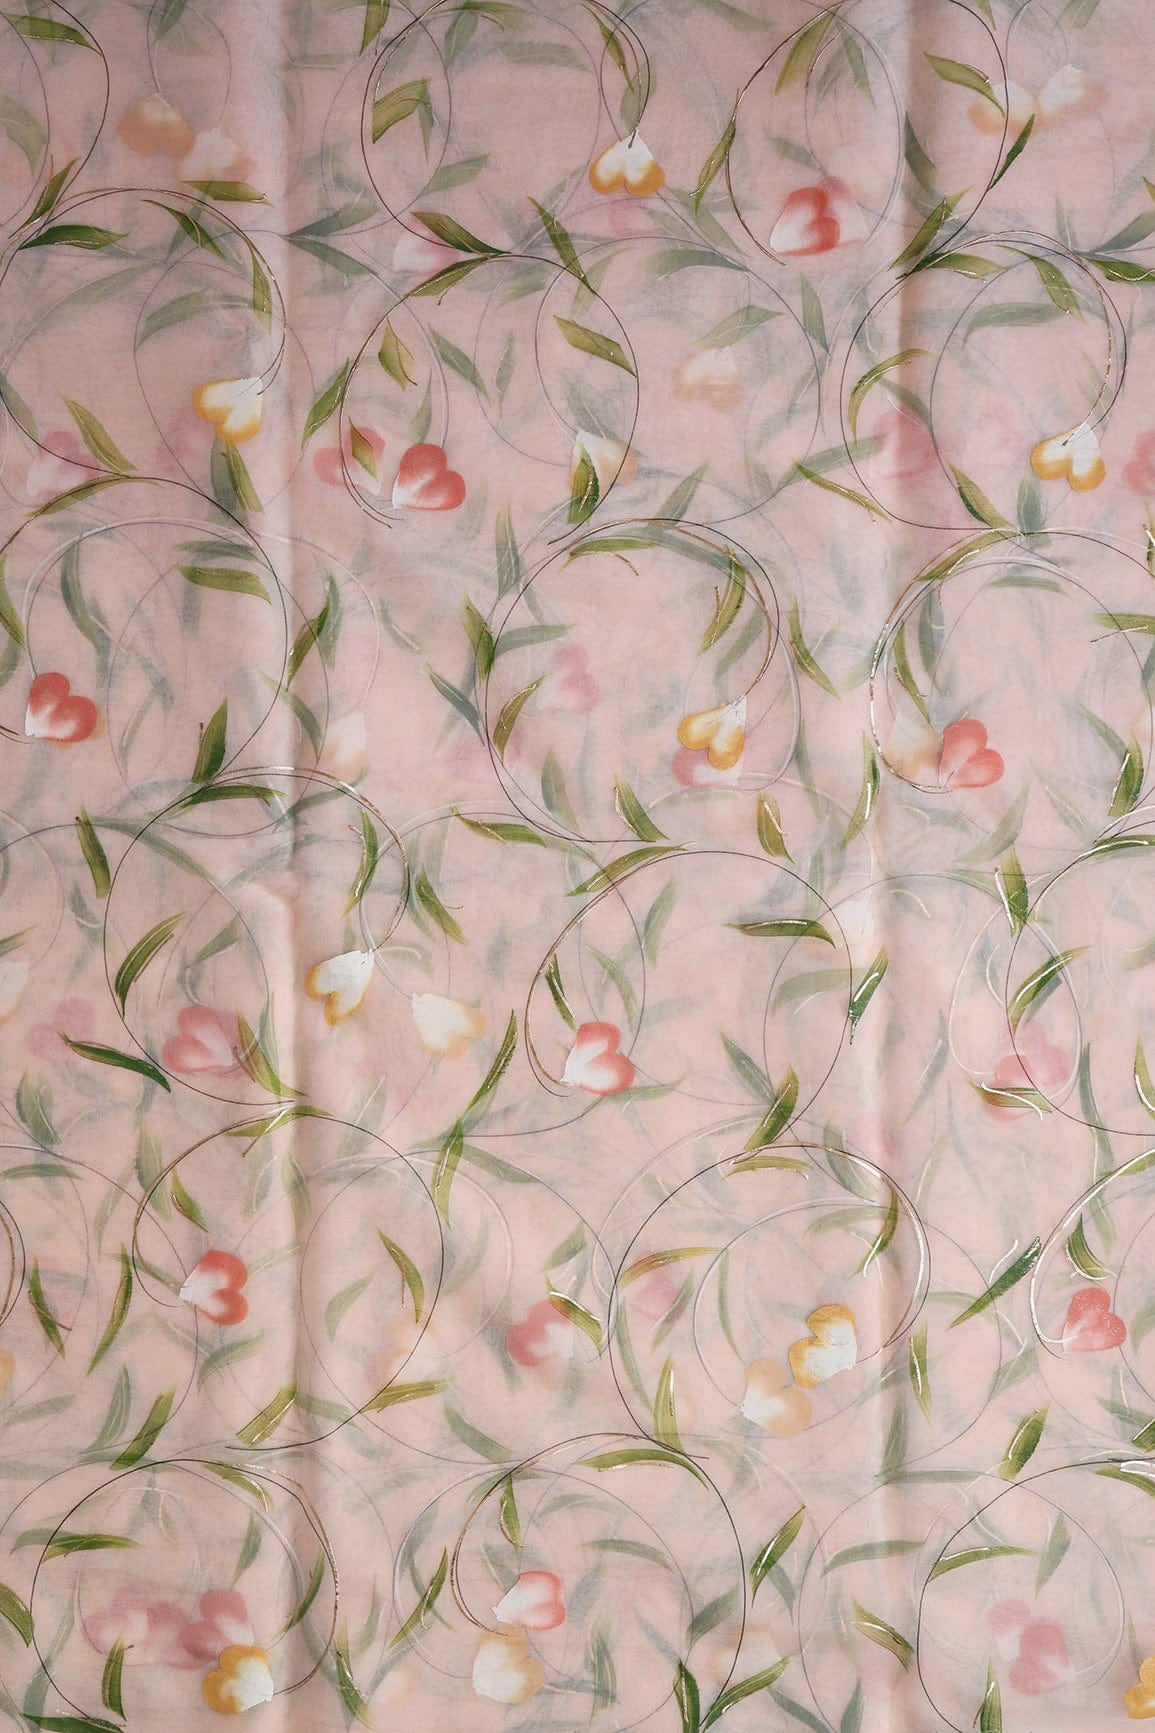 doeraa Embroidery Fabrics Beautiful Floral Hand Painted With Foil Work On Peach Organza Fabric